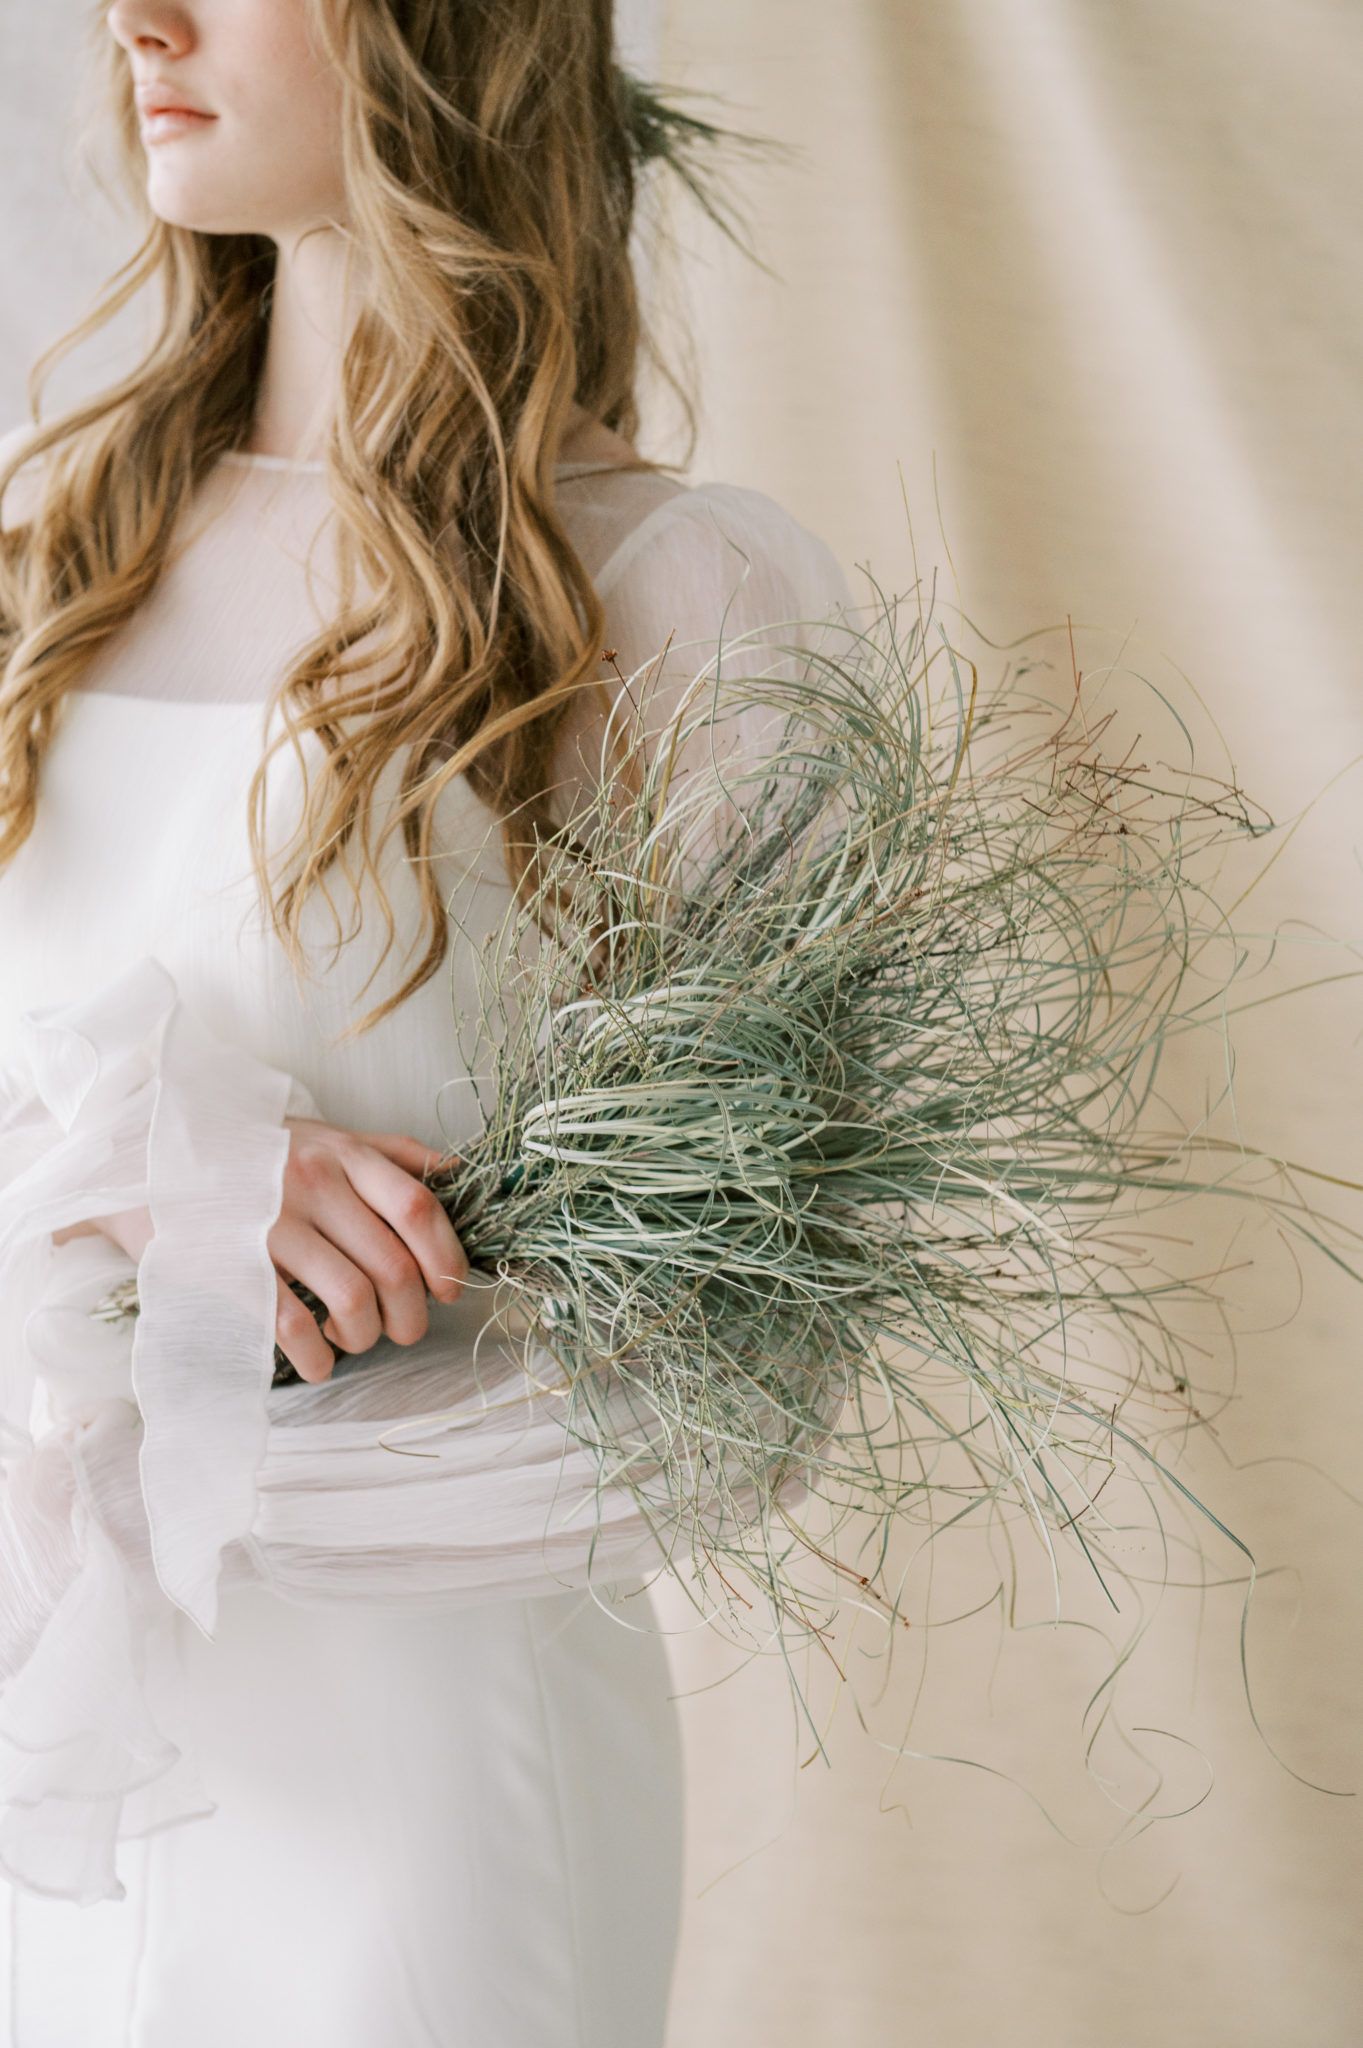 Boho chic bridal trend with dried grass bouquet in Calgary.